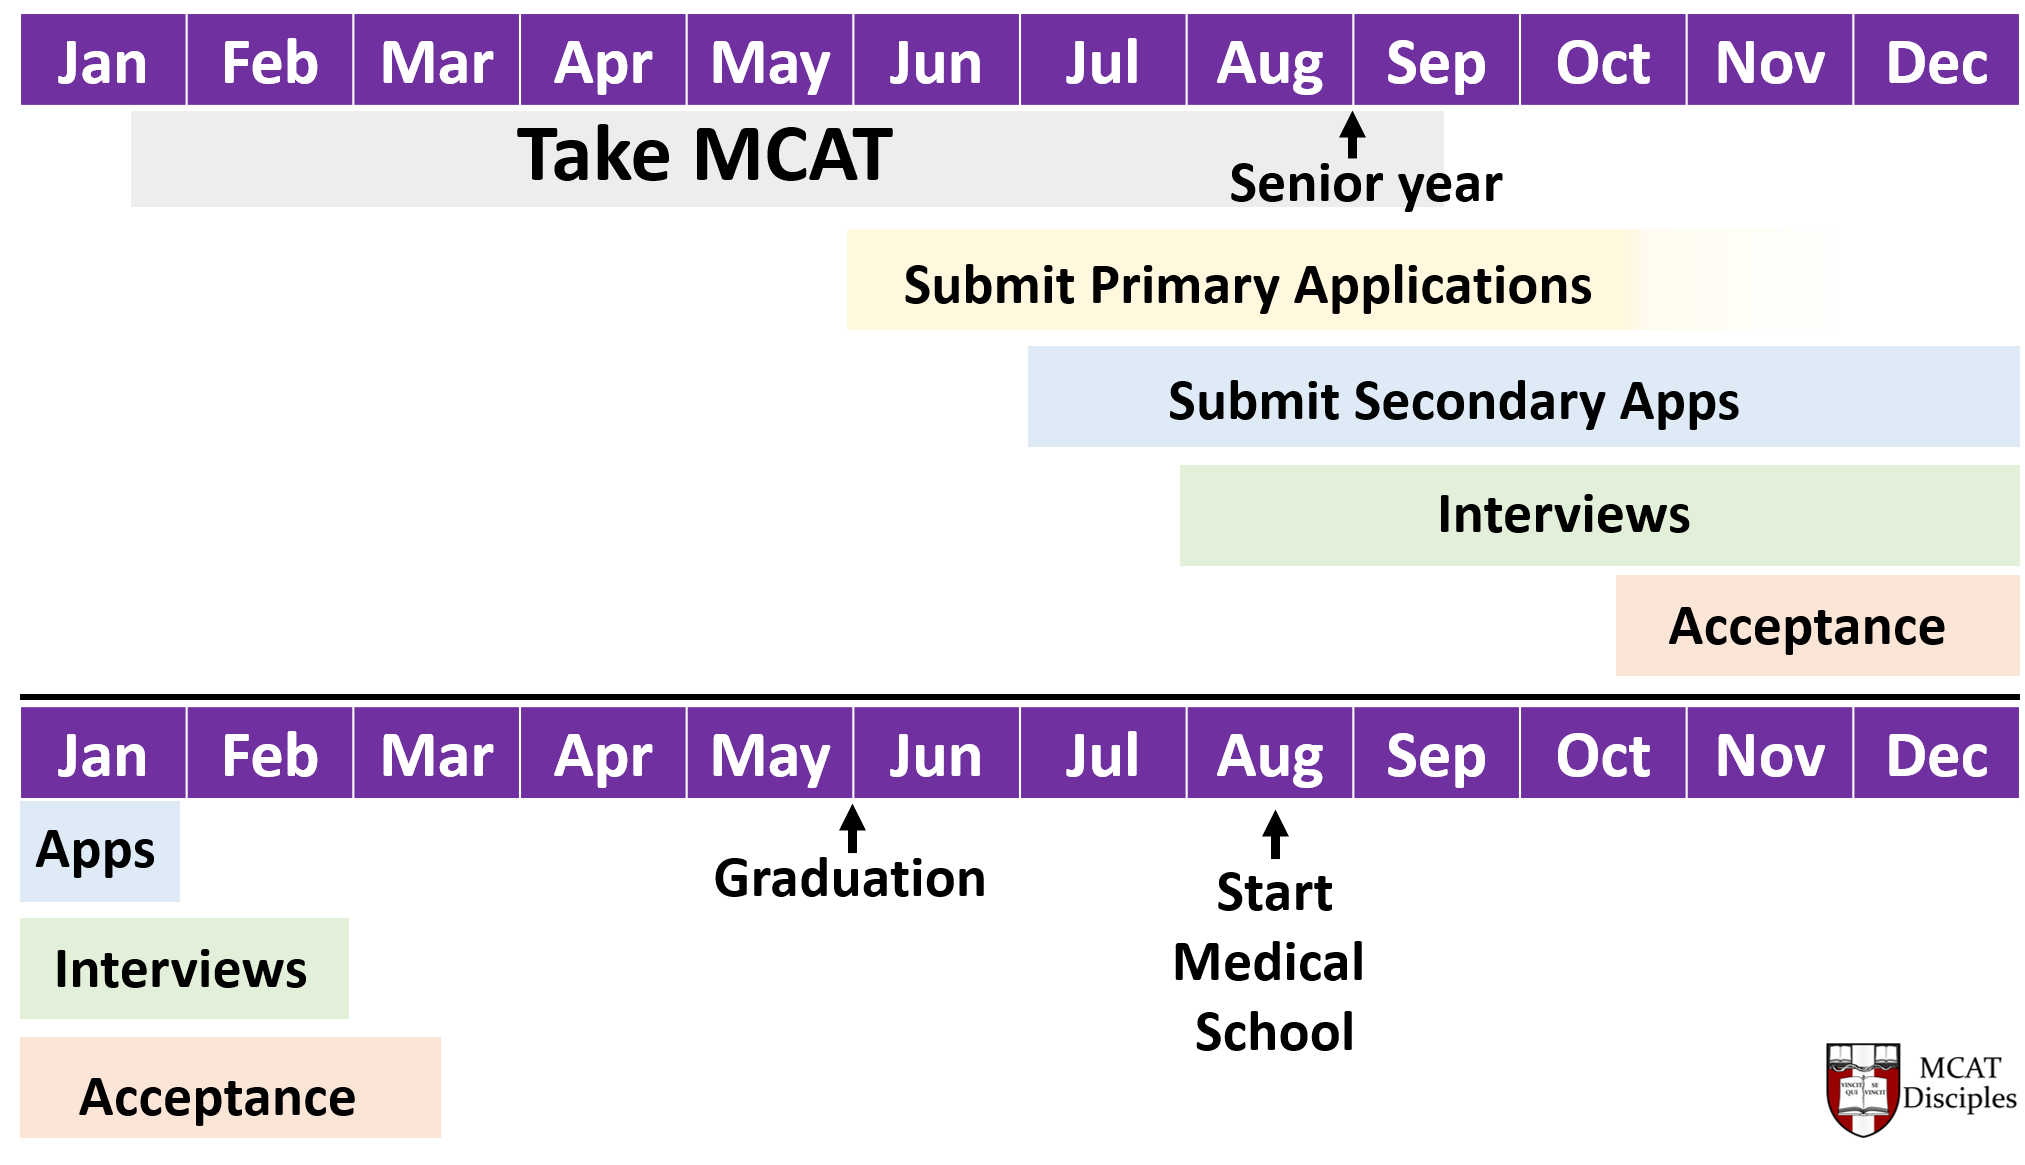 Admissions time line